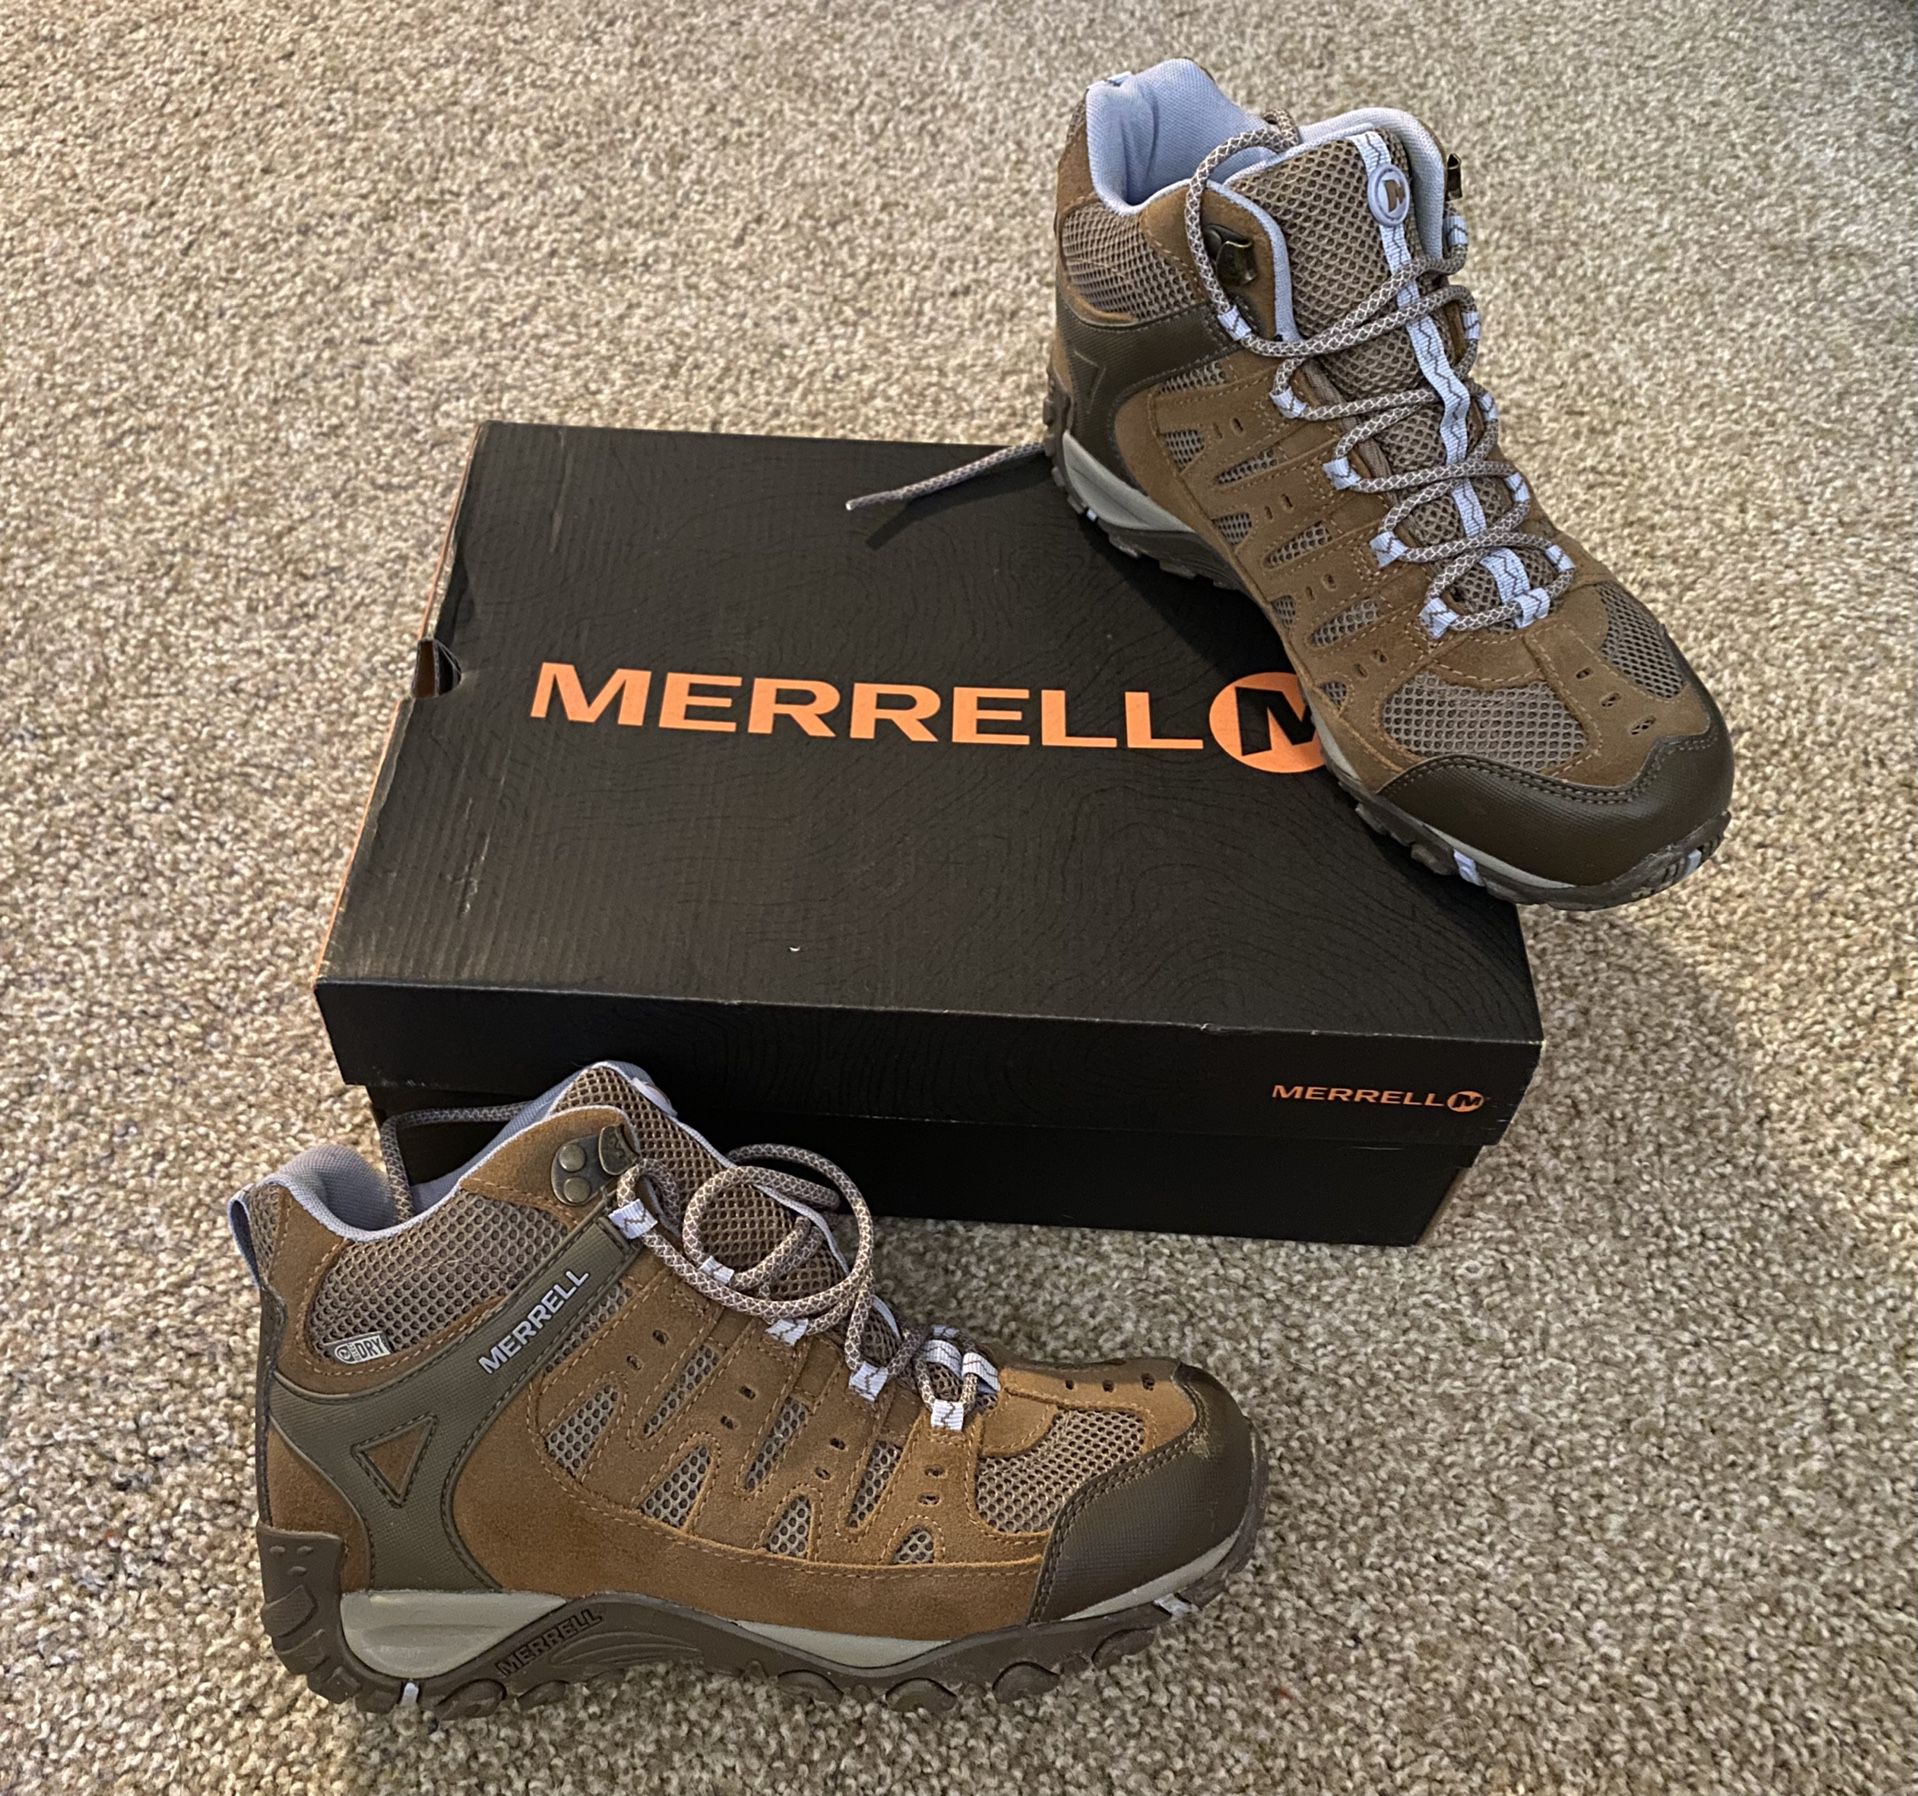 Merrell Hiking Boots Size 8.5 (never Worn)